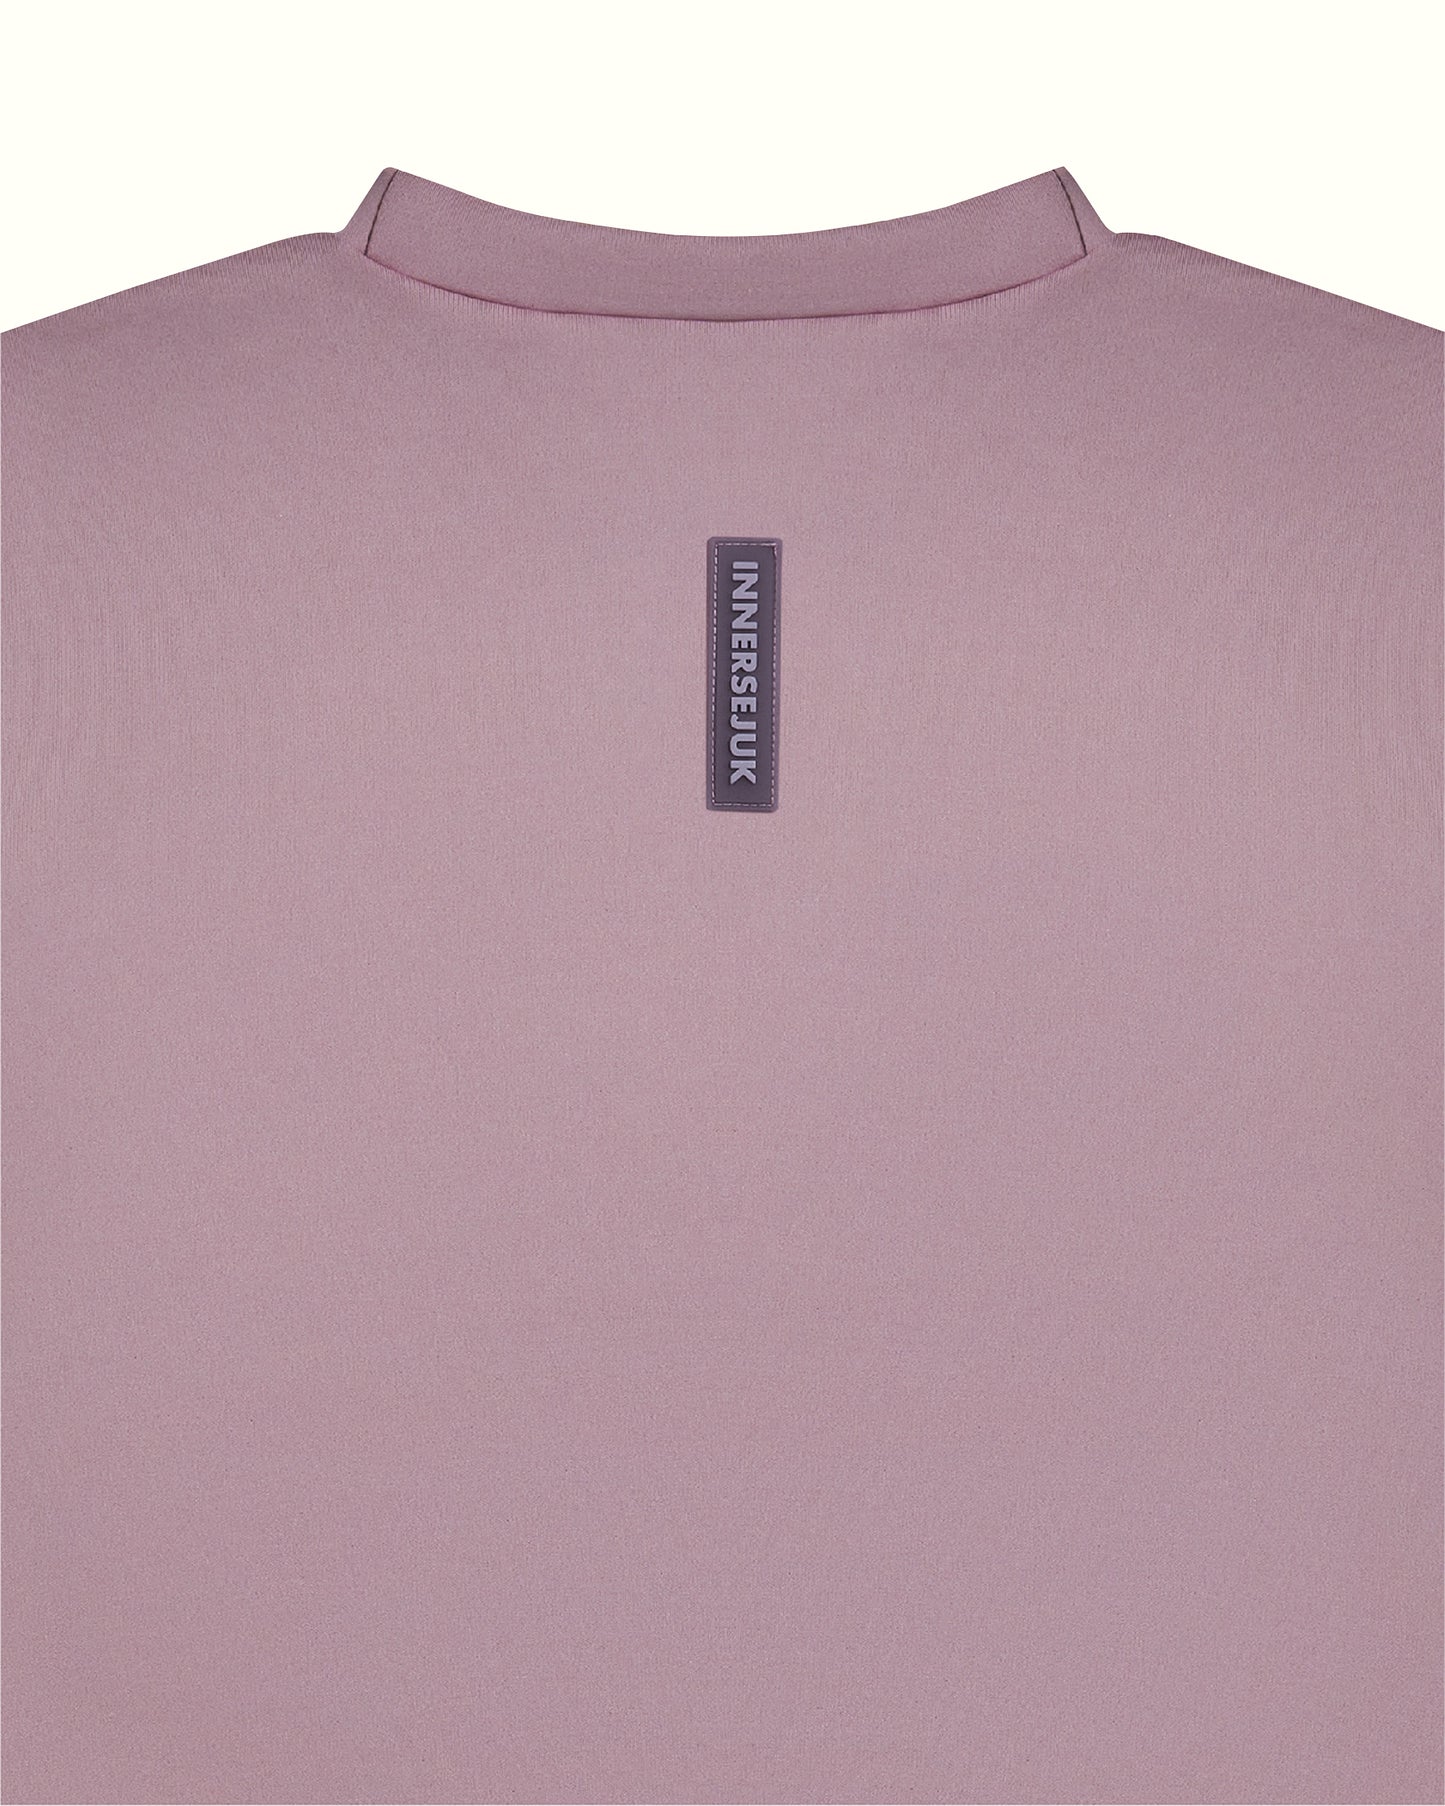 THE ICON 2-IN-1 CROP TOP  IN DUSTY PURPLE